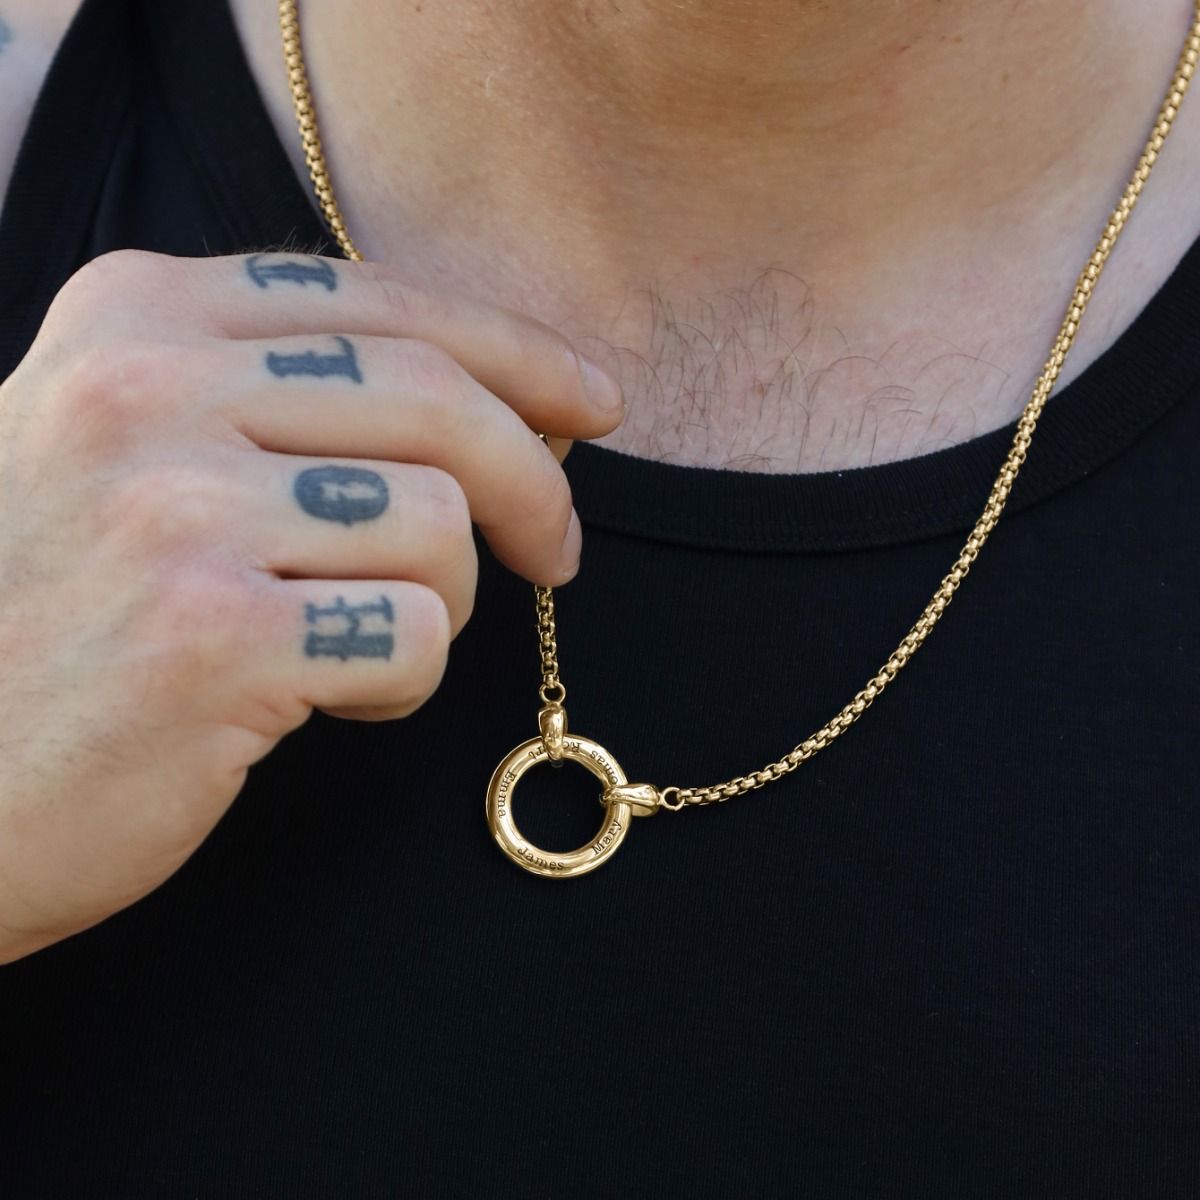 Buy Silver-Toned Chains for Men by Vendsy Online | Ajio.com